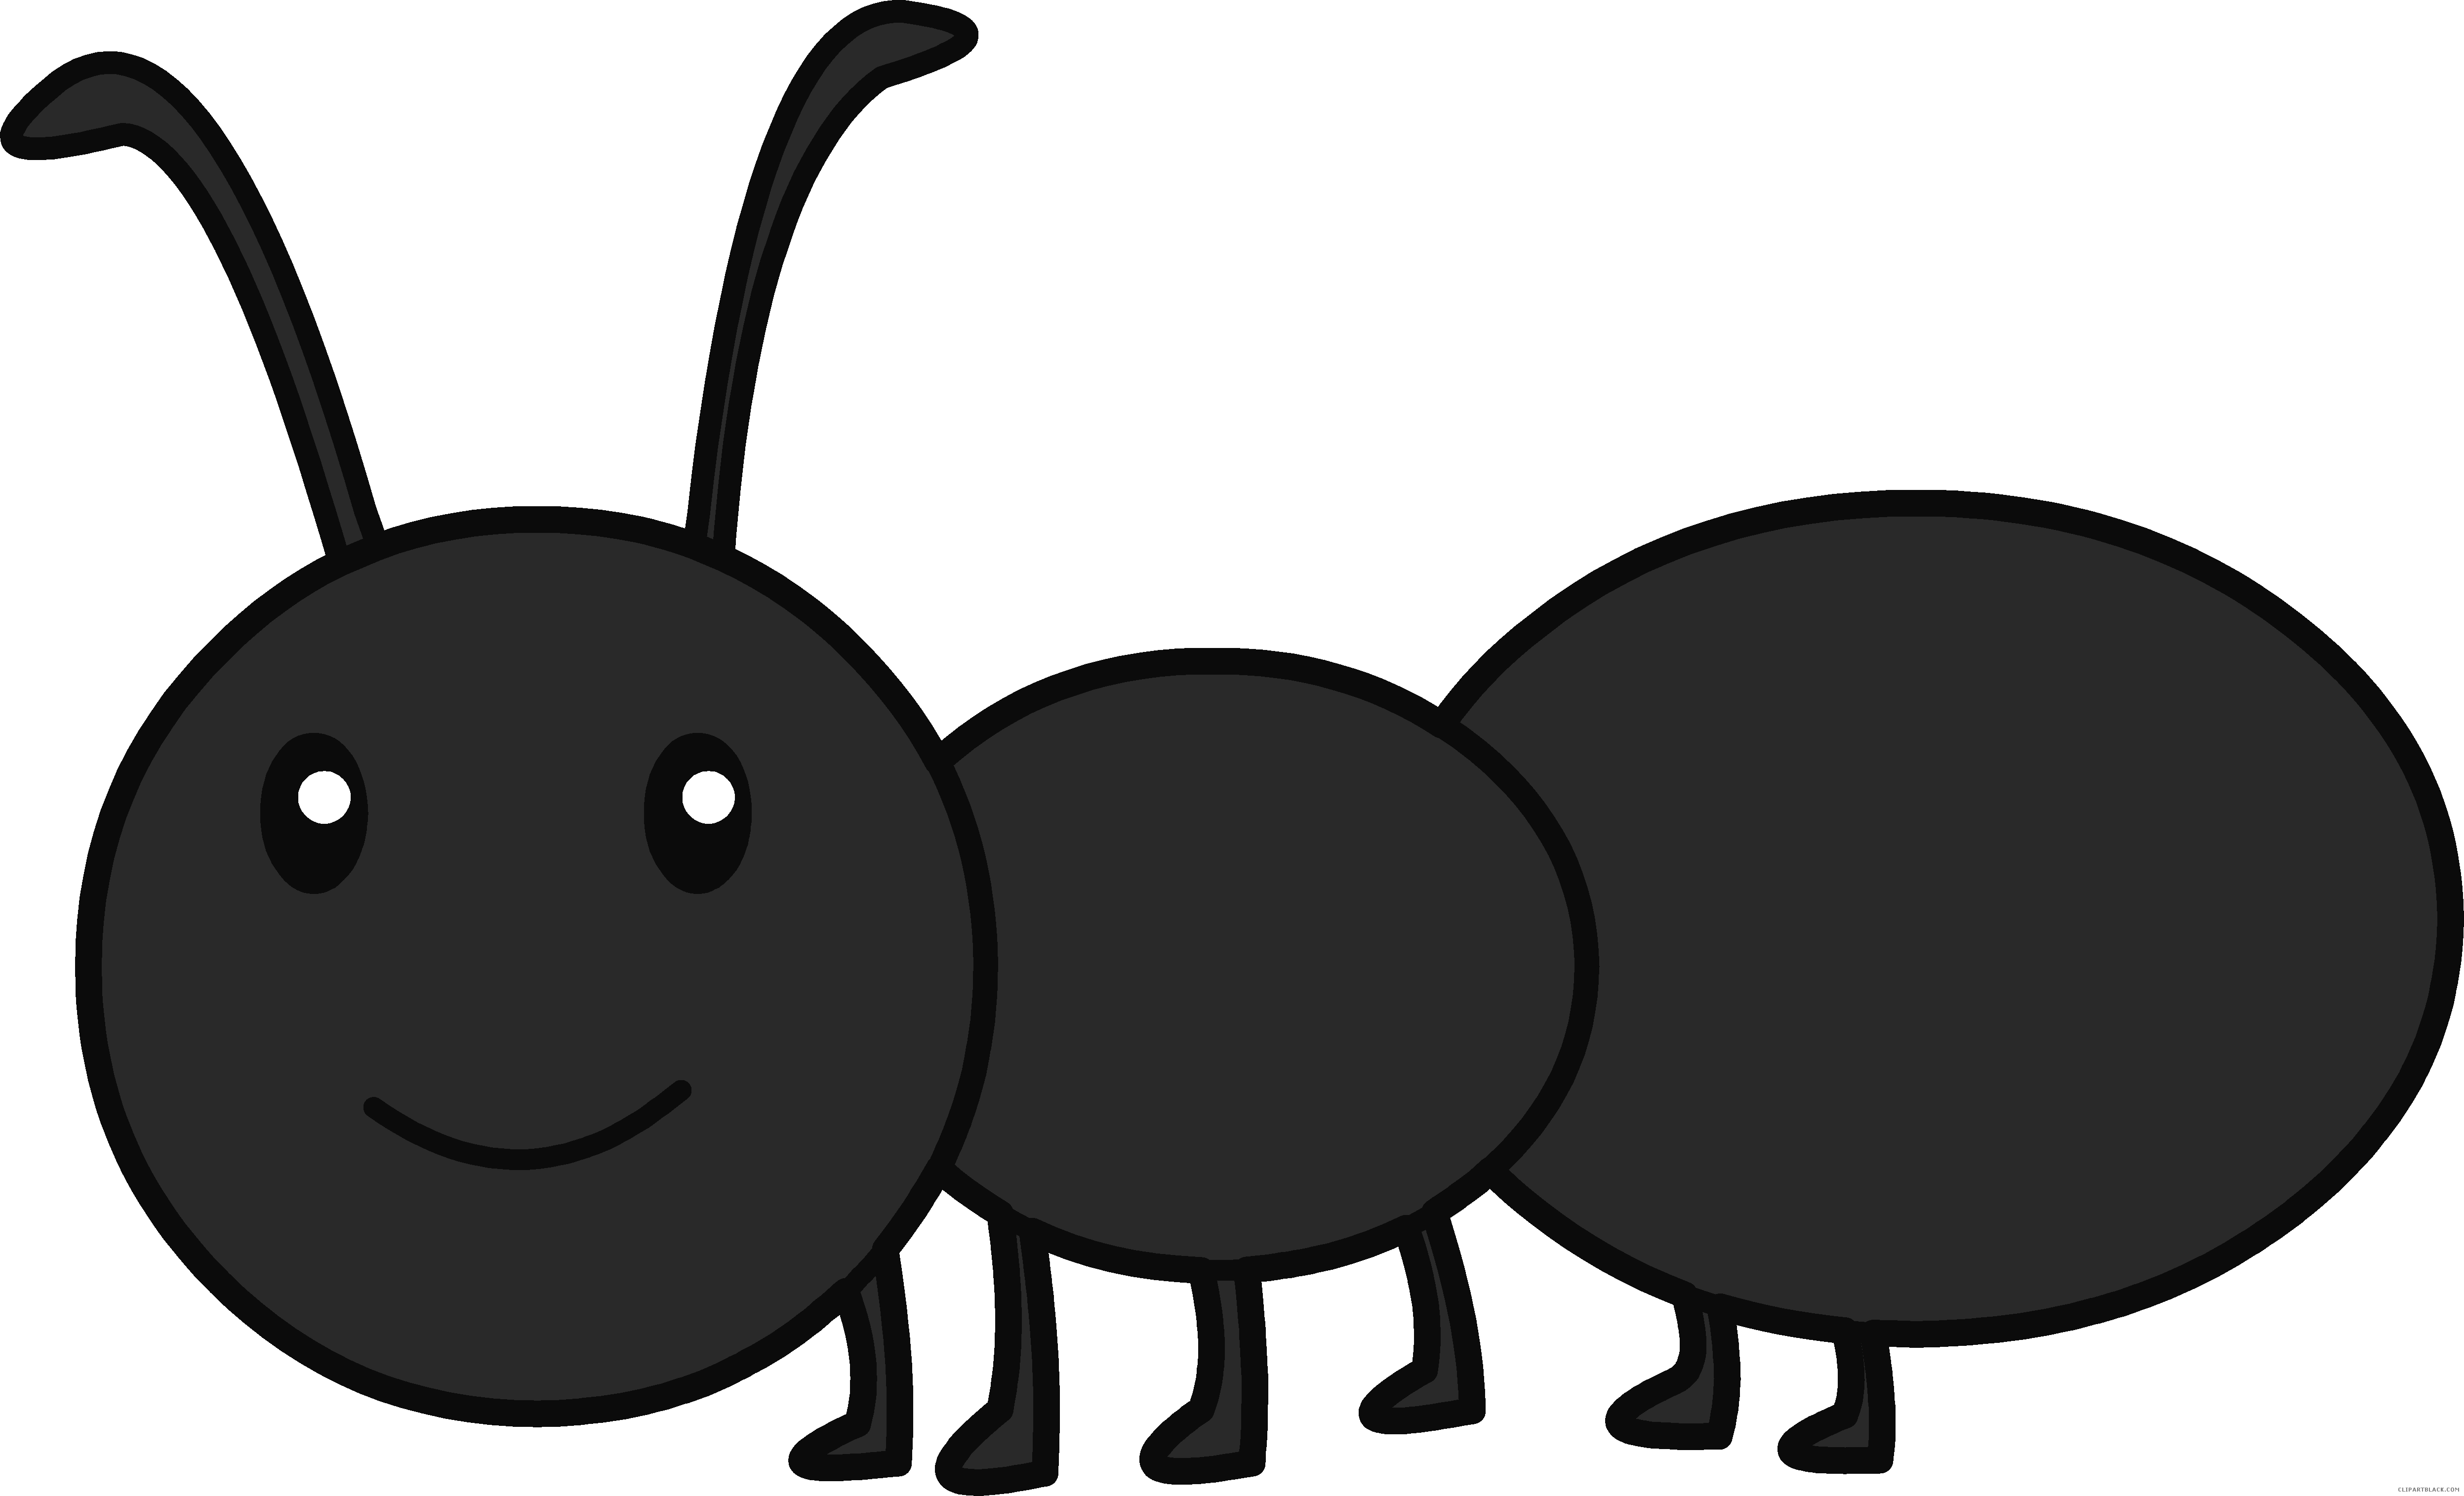 Ant page of clipartblack. Free clipart picnic